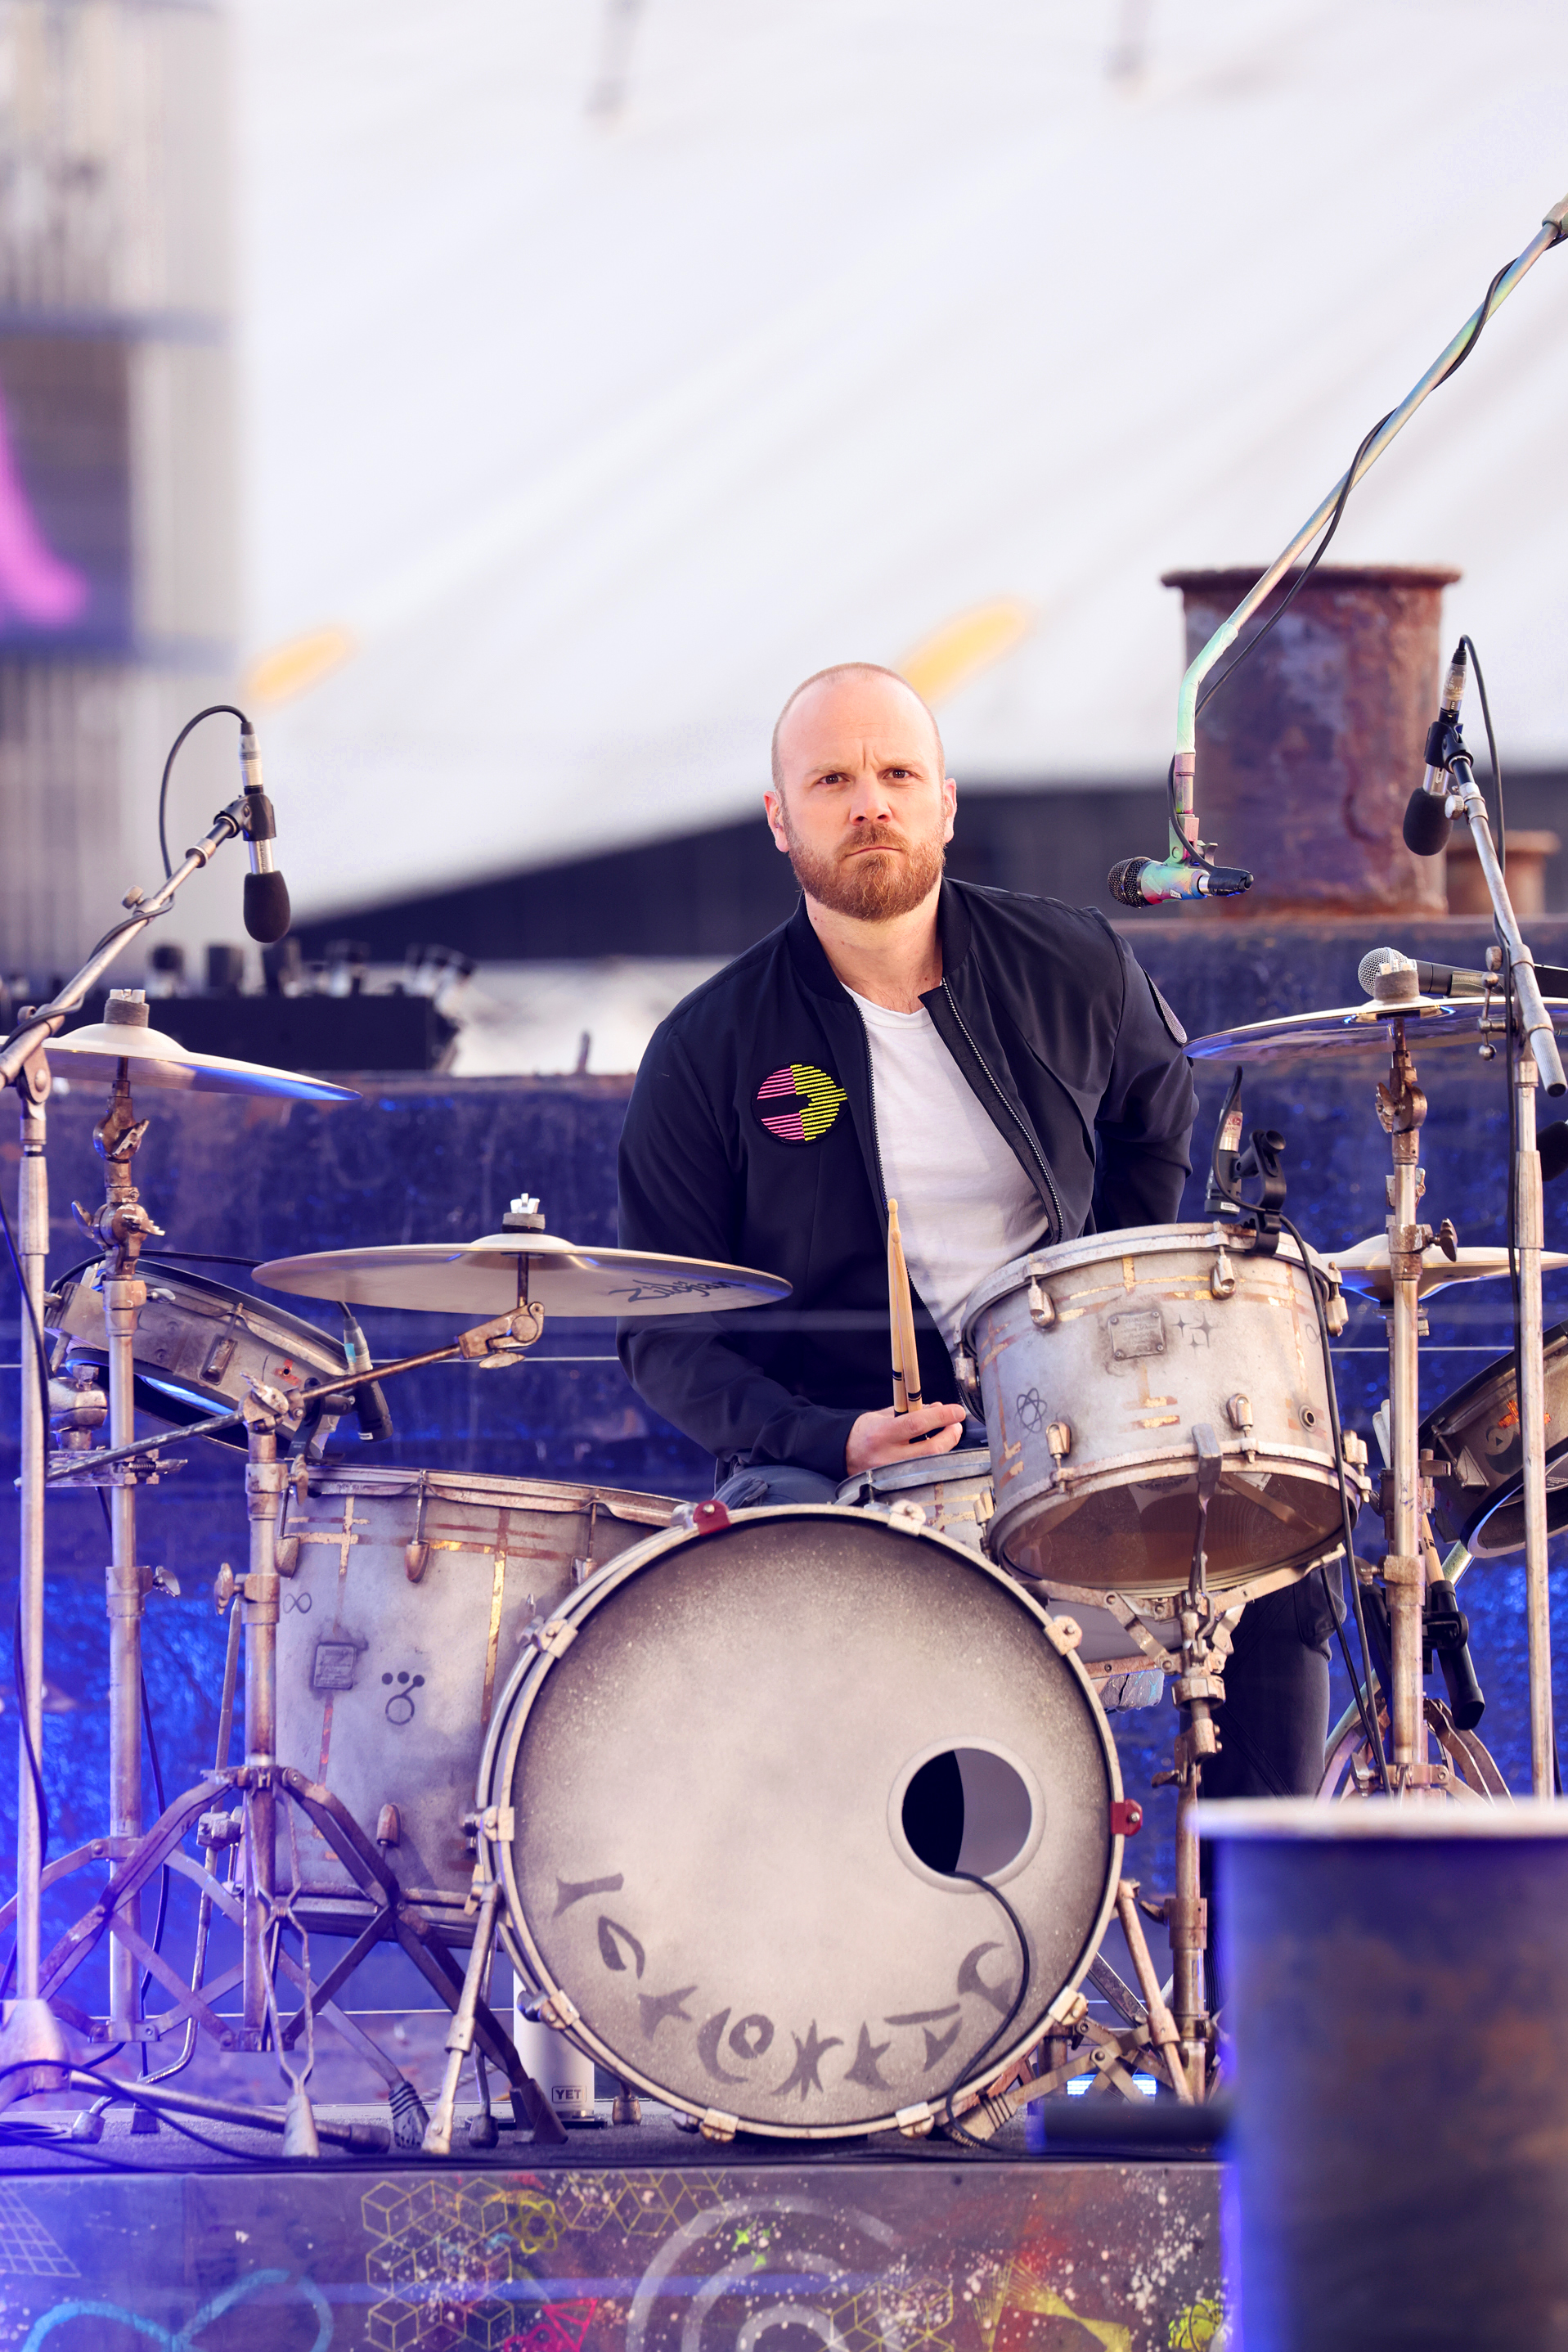 All the drummers: Will Champion